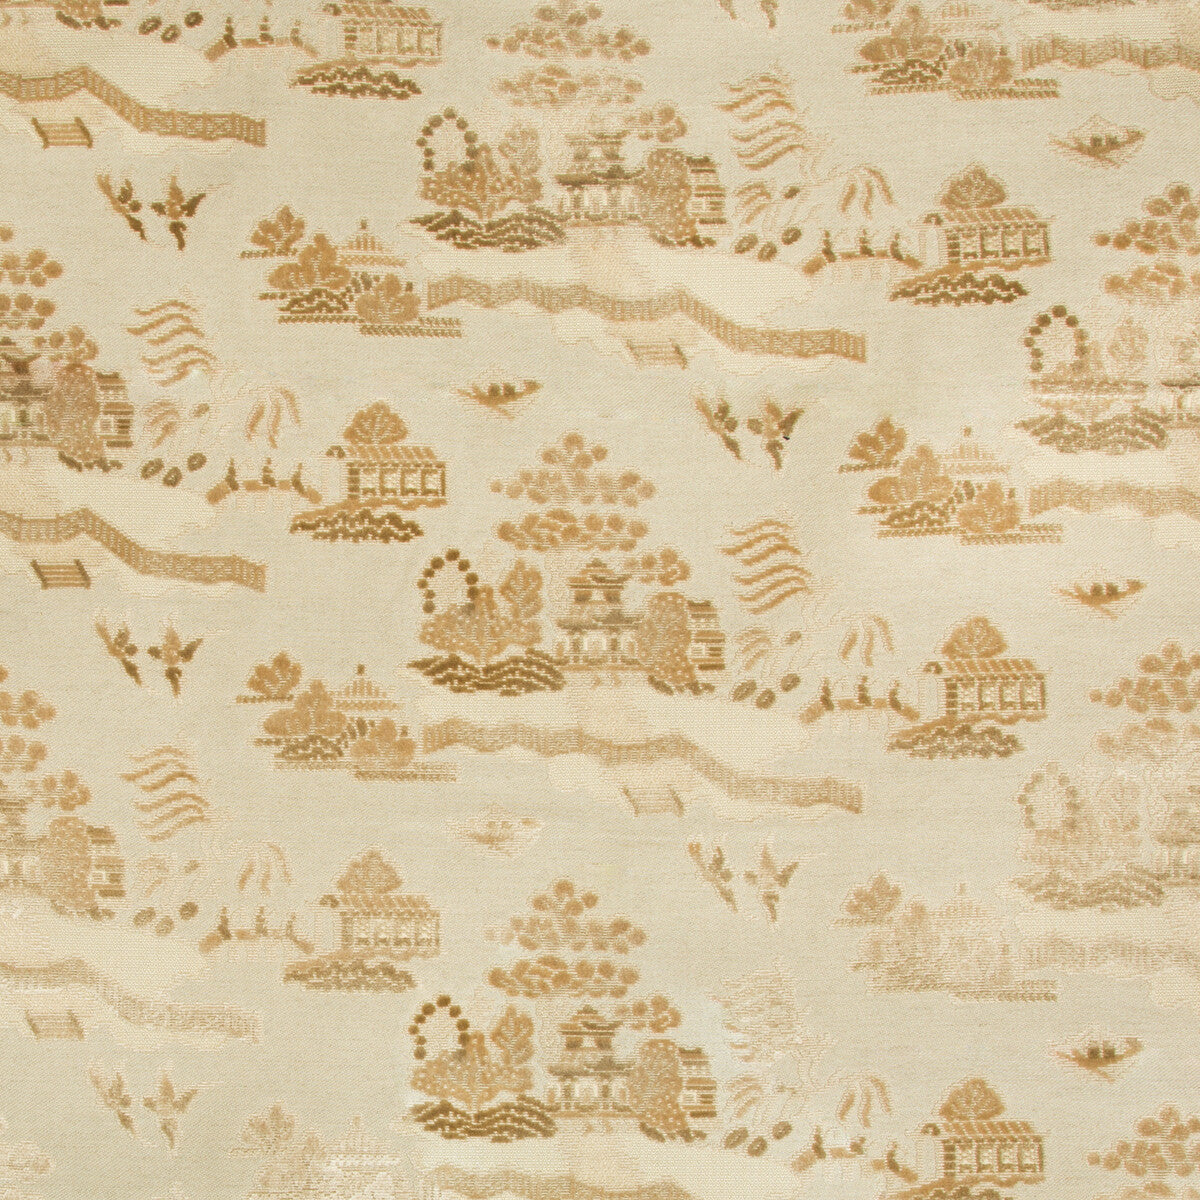 La Pagode Velvet fabric in sand color - pattern 8017129.16.0 - by Brunschwig &amp; Fils in the Les Ensembliers collection